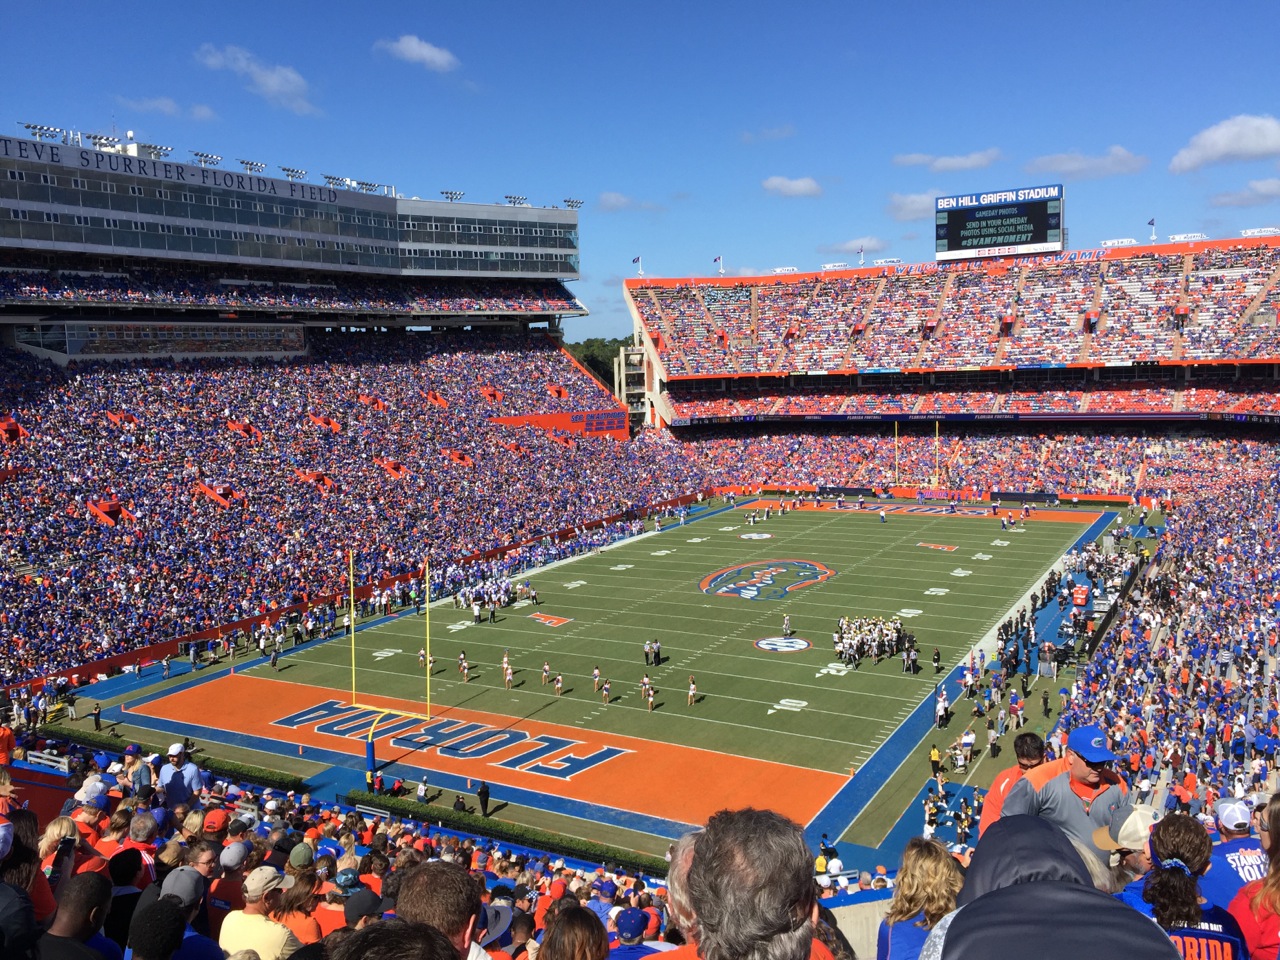 WiFi breathes new life into ‘The Swamp’ at the University of Florida